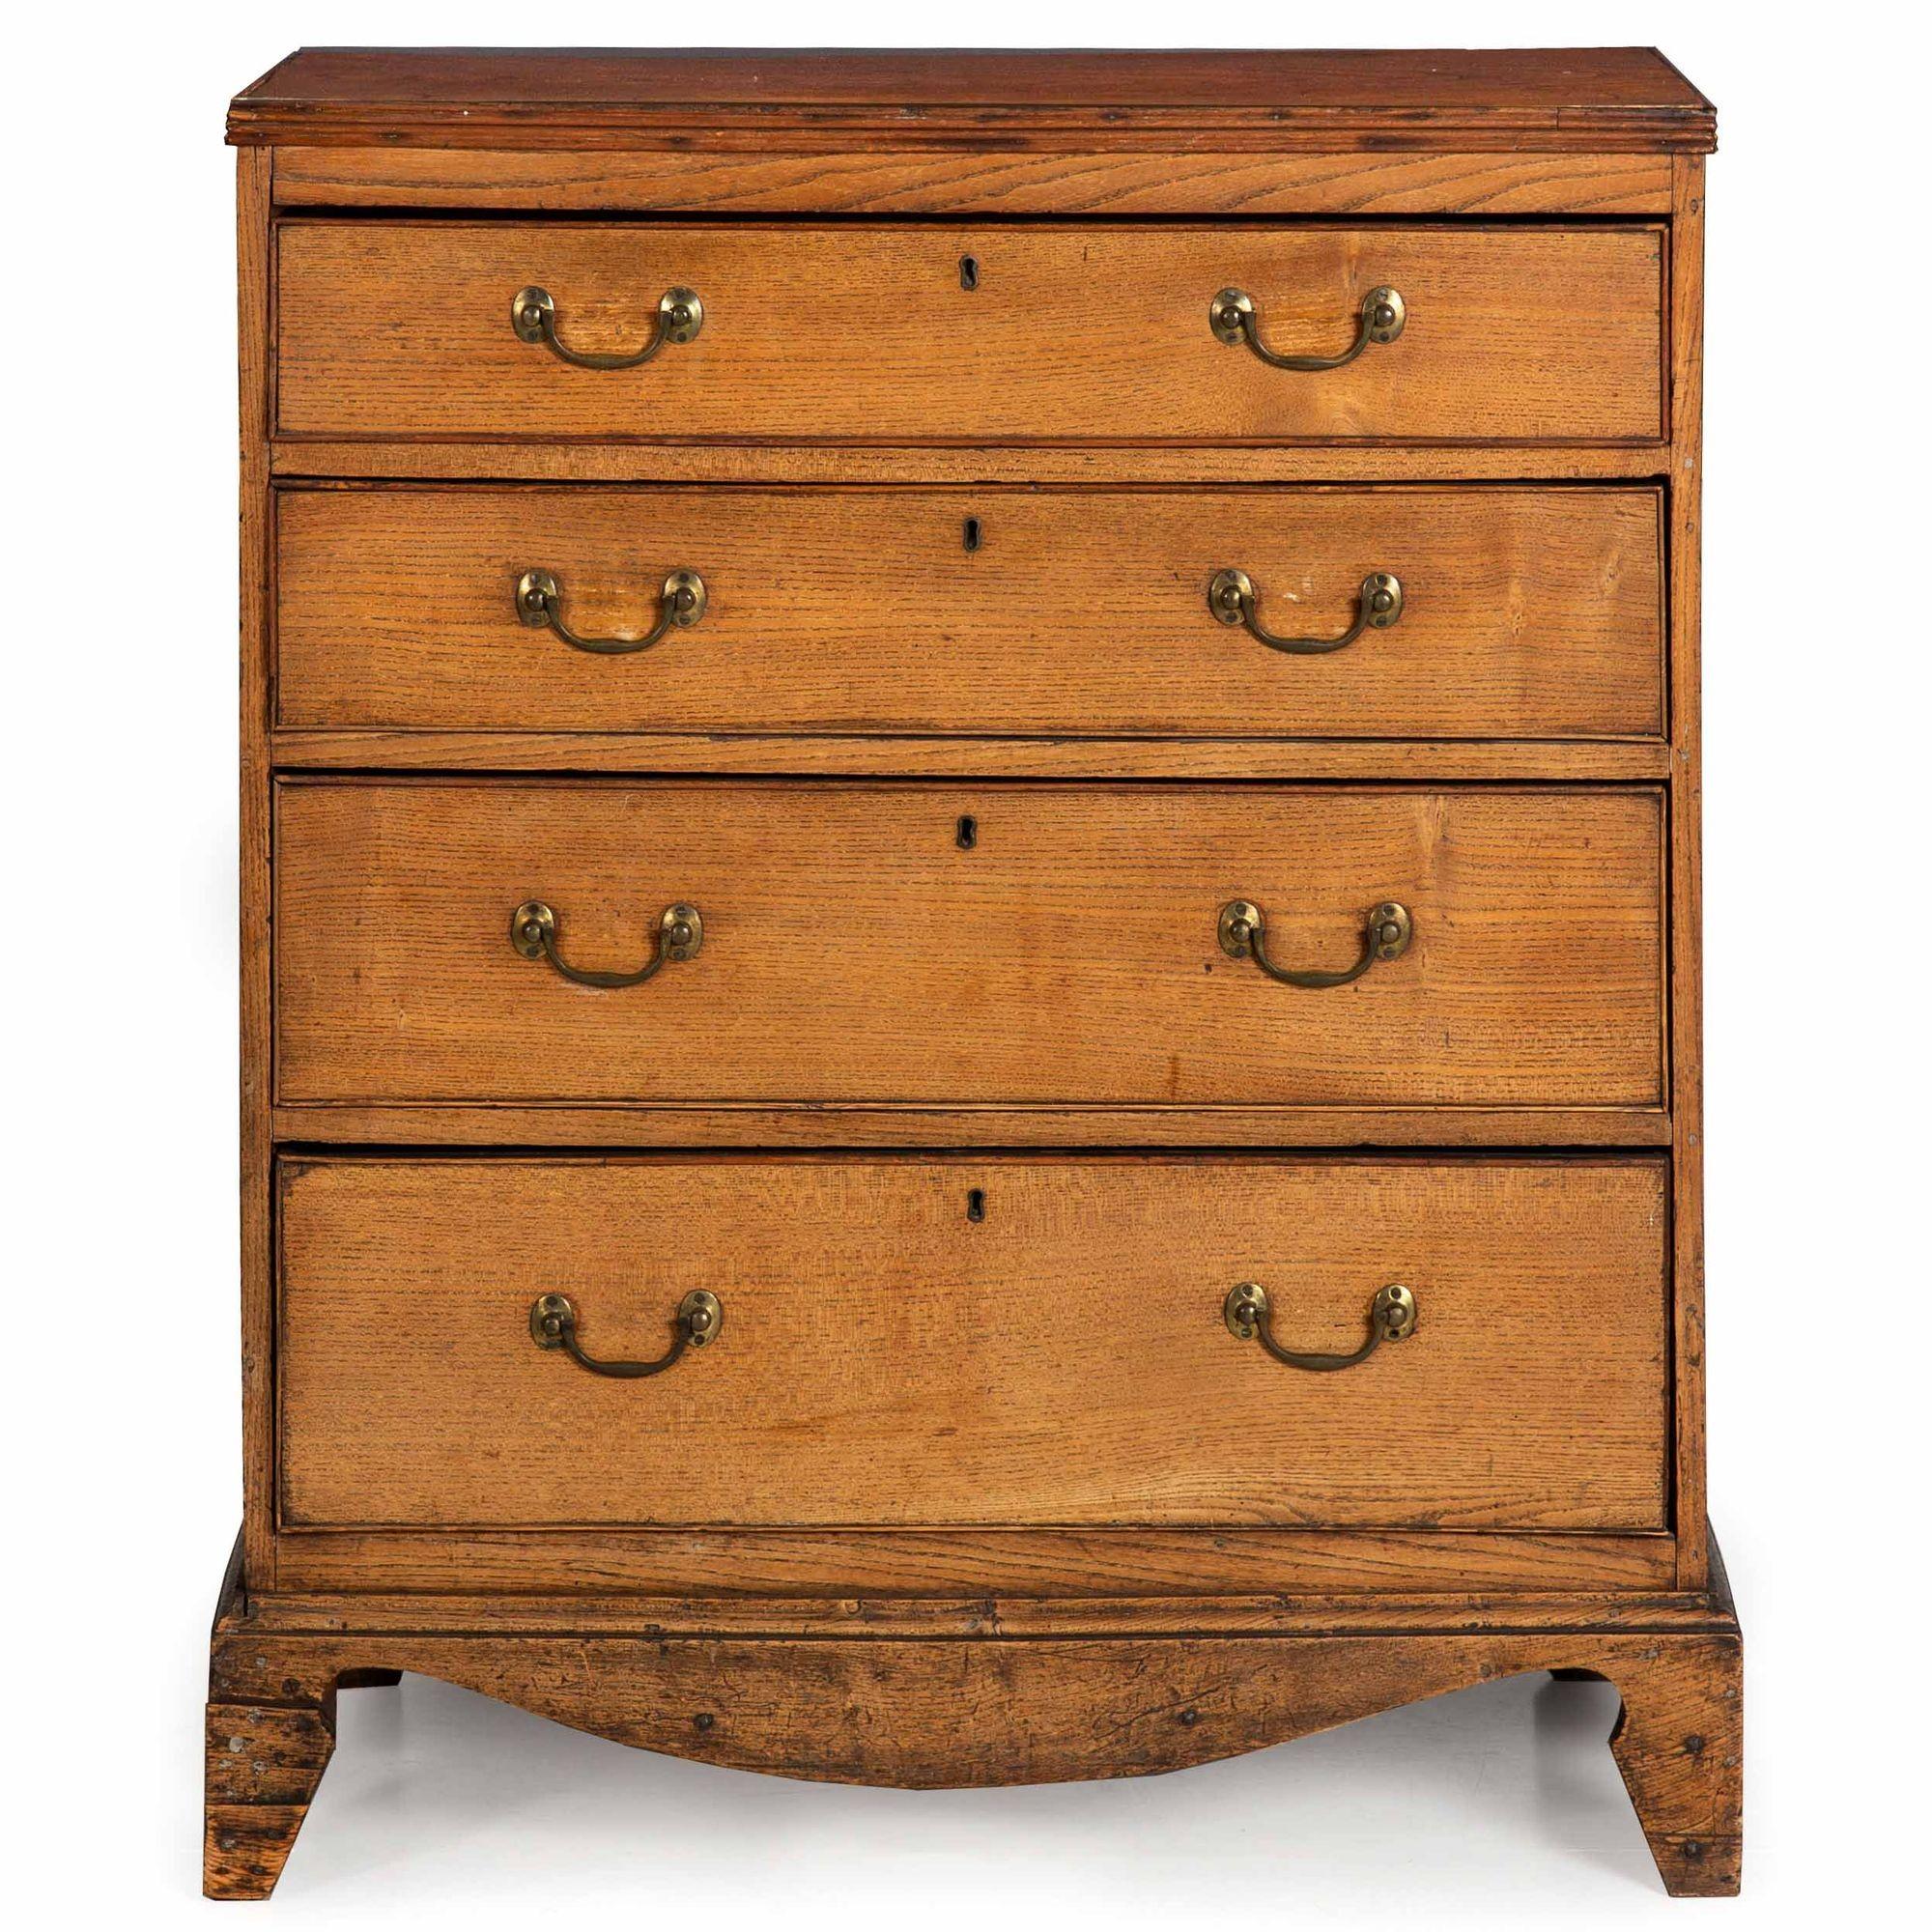 ENGLISH PATINATED ELM CHEST OF FOUR DRAWERS
Raised on bracket feet; circa first quarter of the 19th century
Item # 402ZPB08Q

This gorgeous heavily worn and patinated elm chest of drawers features a rich sunbleached surface throughout that is made